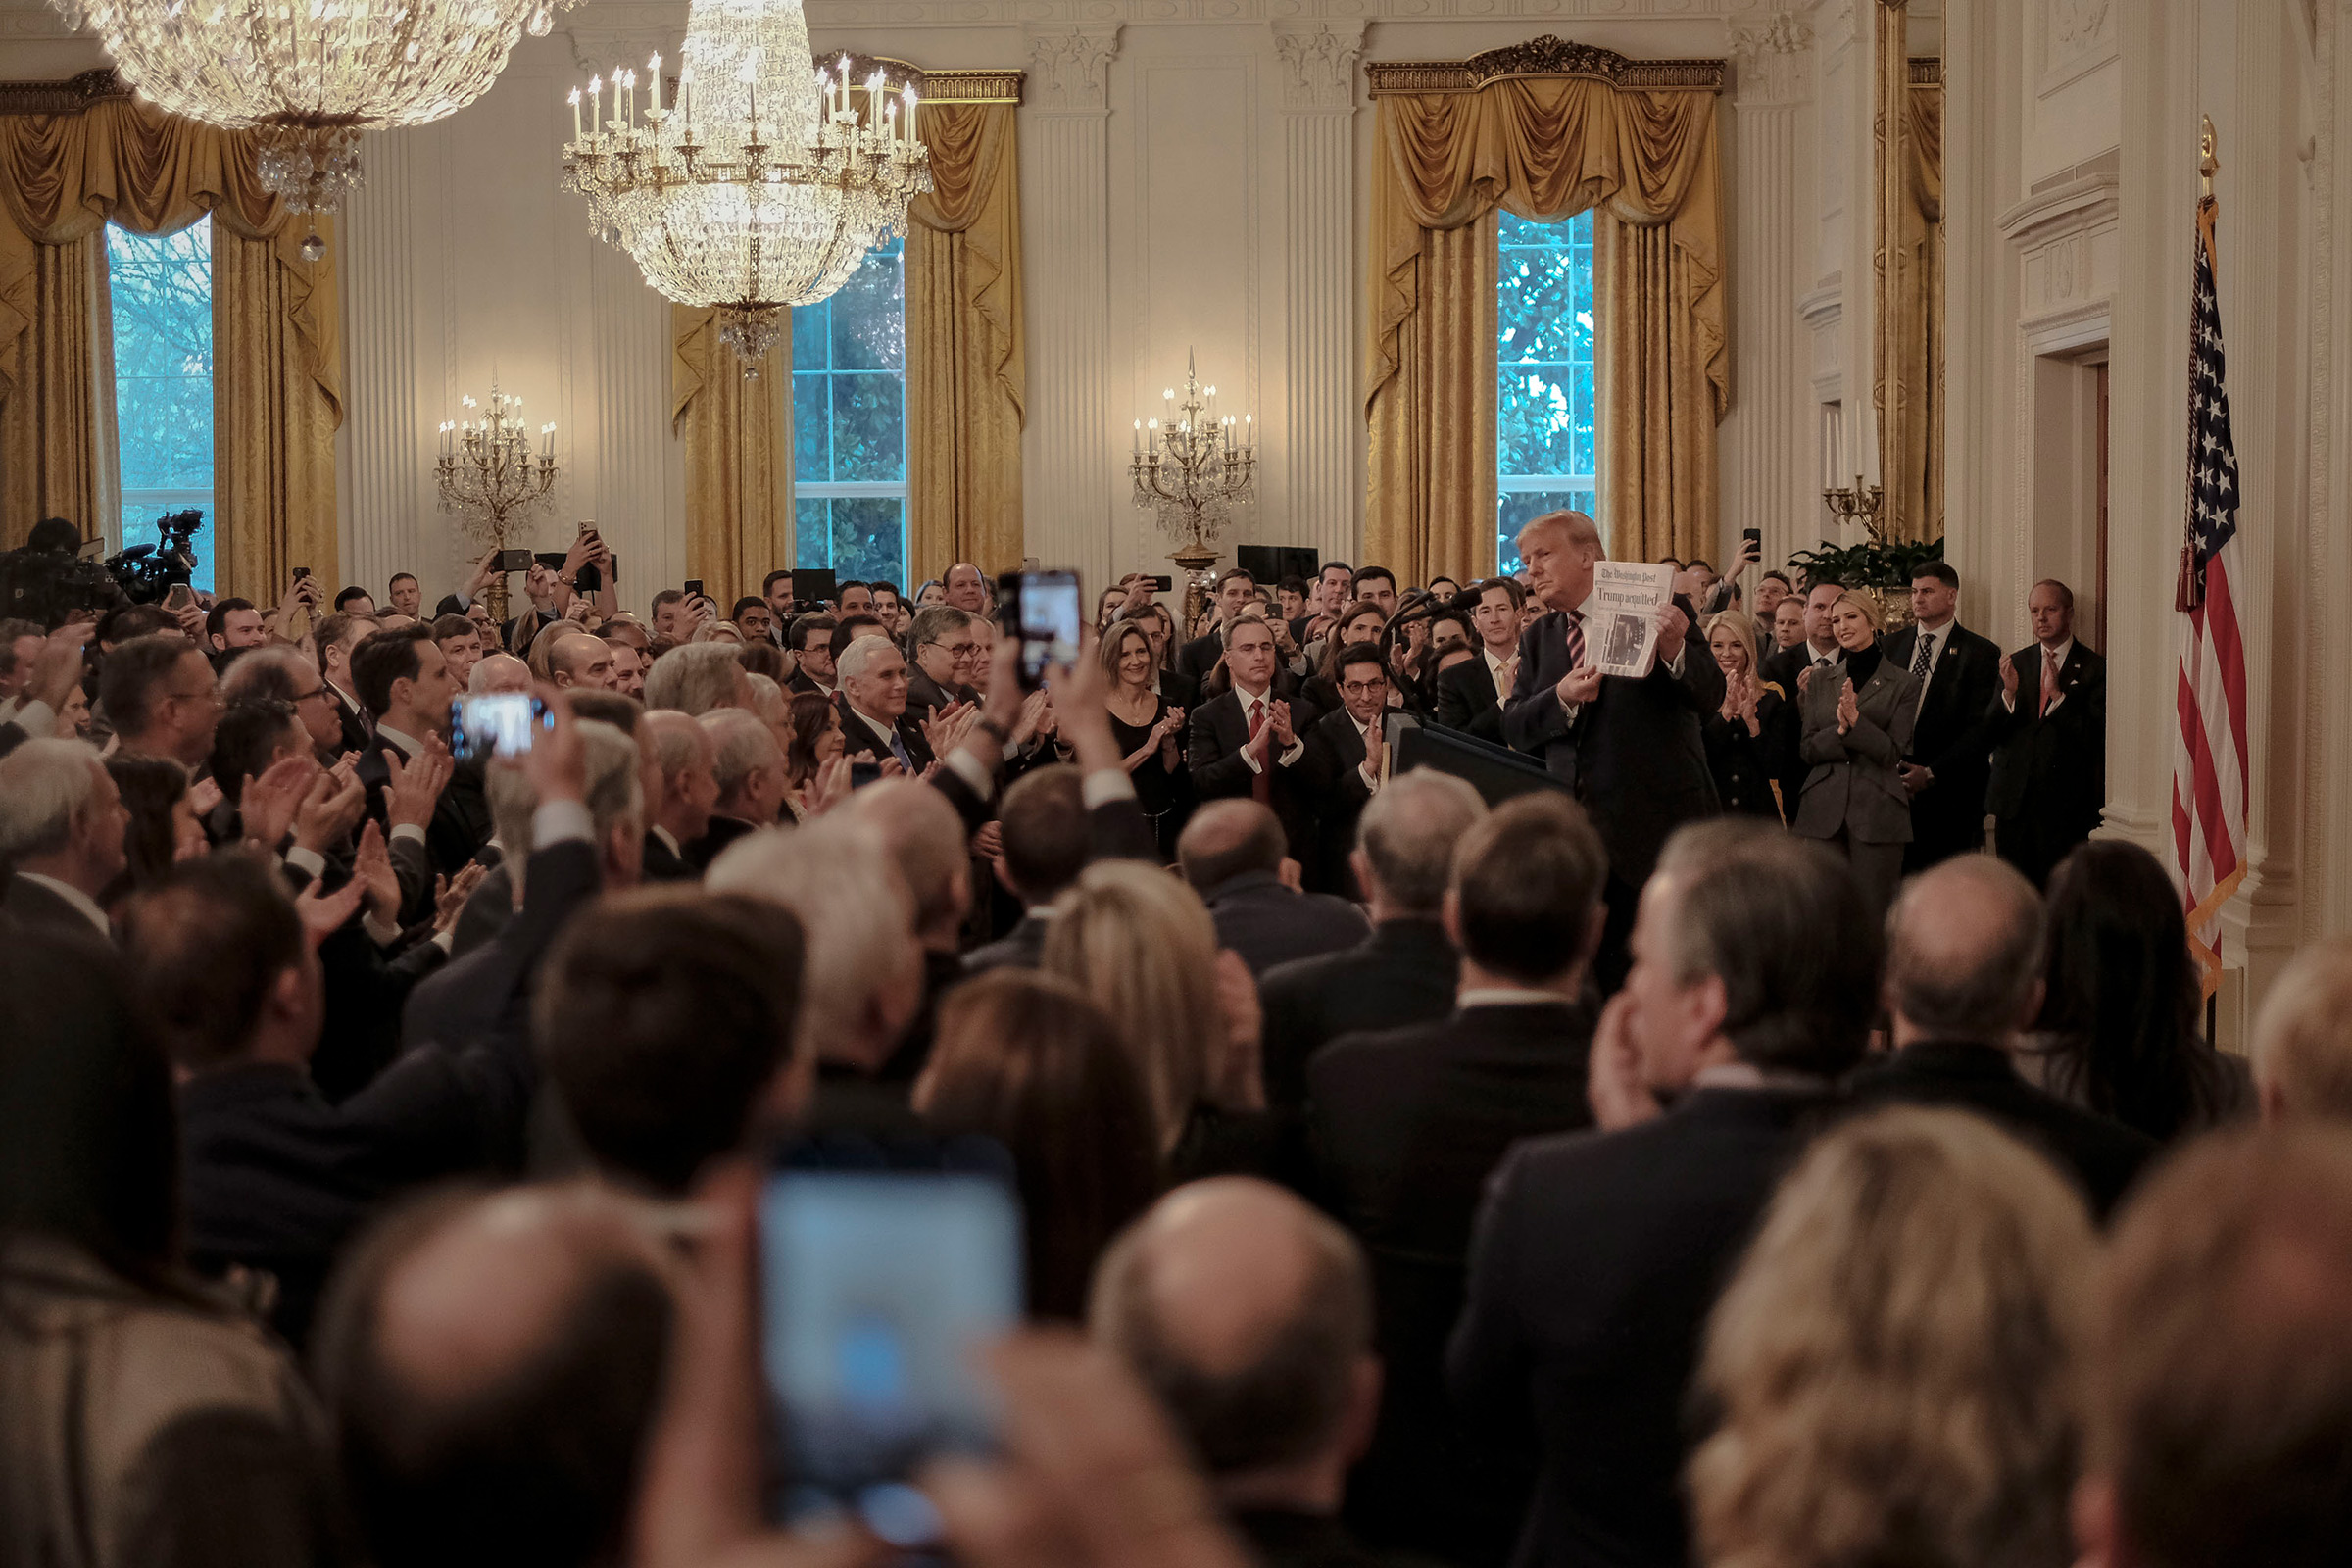 President Donald Trump speaks in the East Room of the White House in Washington, D.C., on Feb. 6, 2020, one day after the Senate acquitted him on two articles of impeachment. (Gabriella Demczuk for TIME)